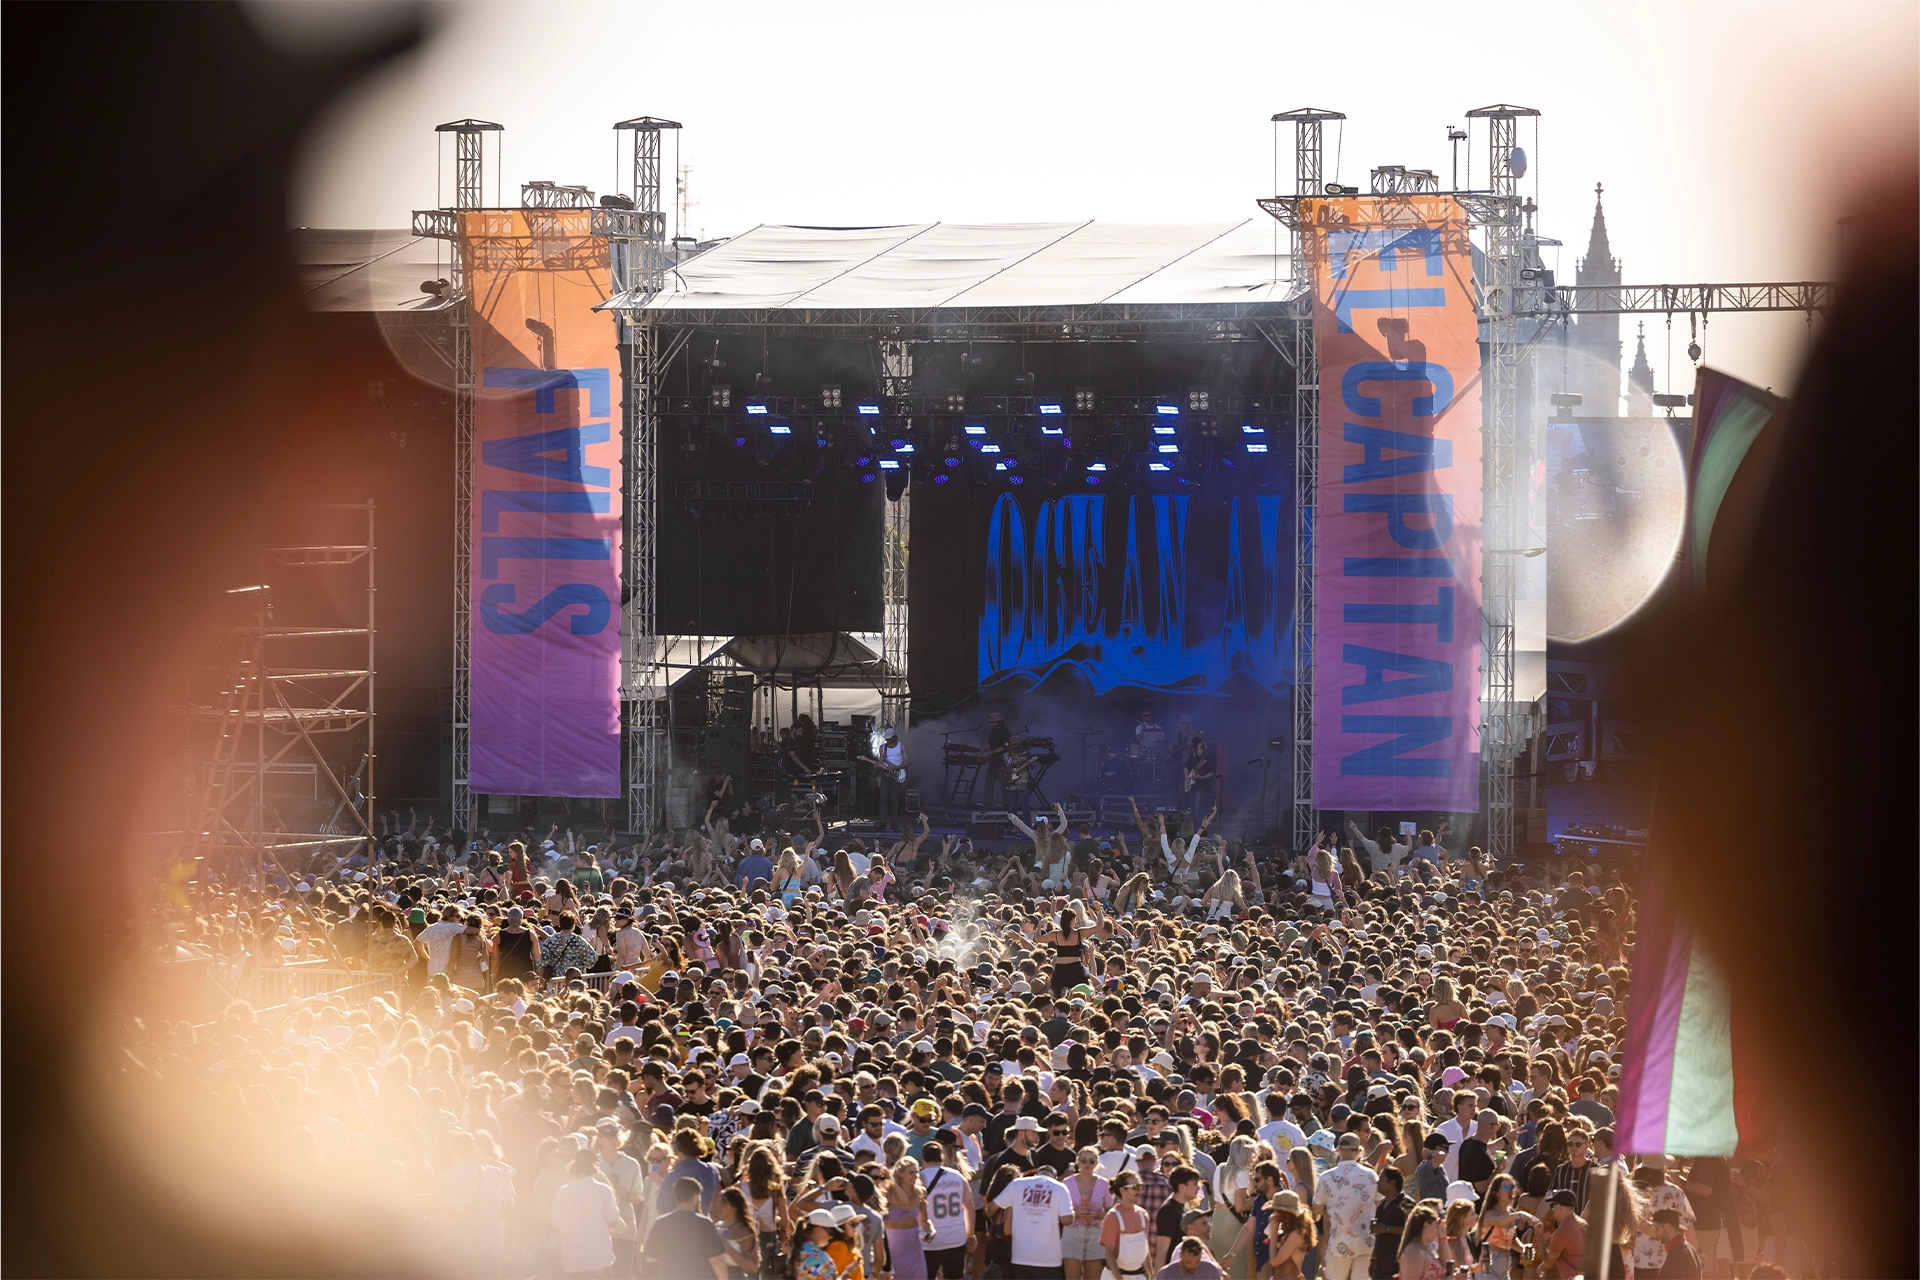 Daytime crowd at a music festival with a large stage in the background